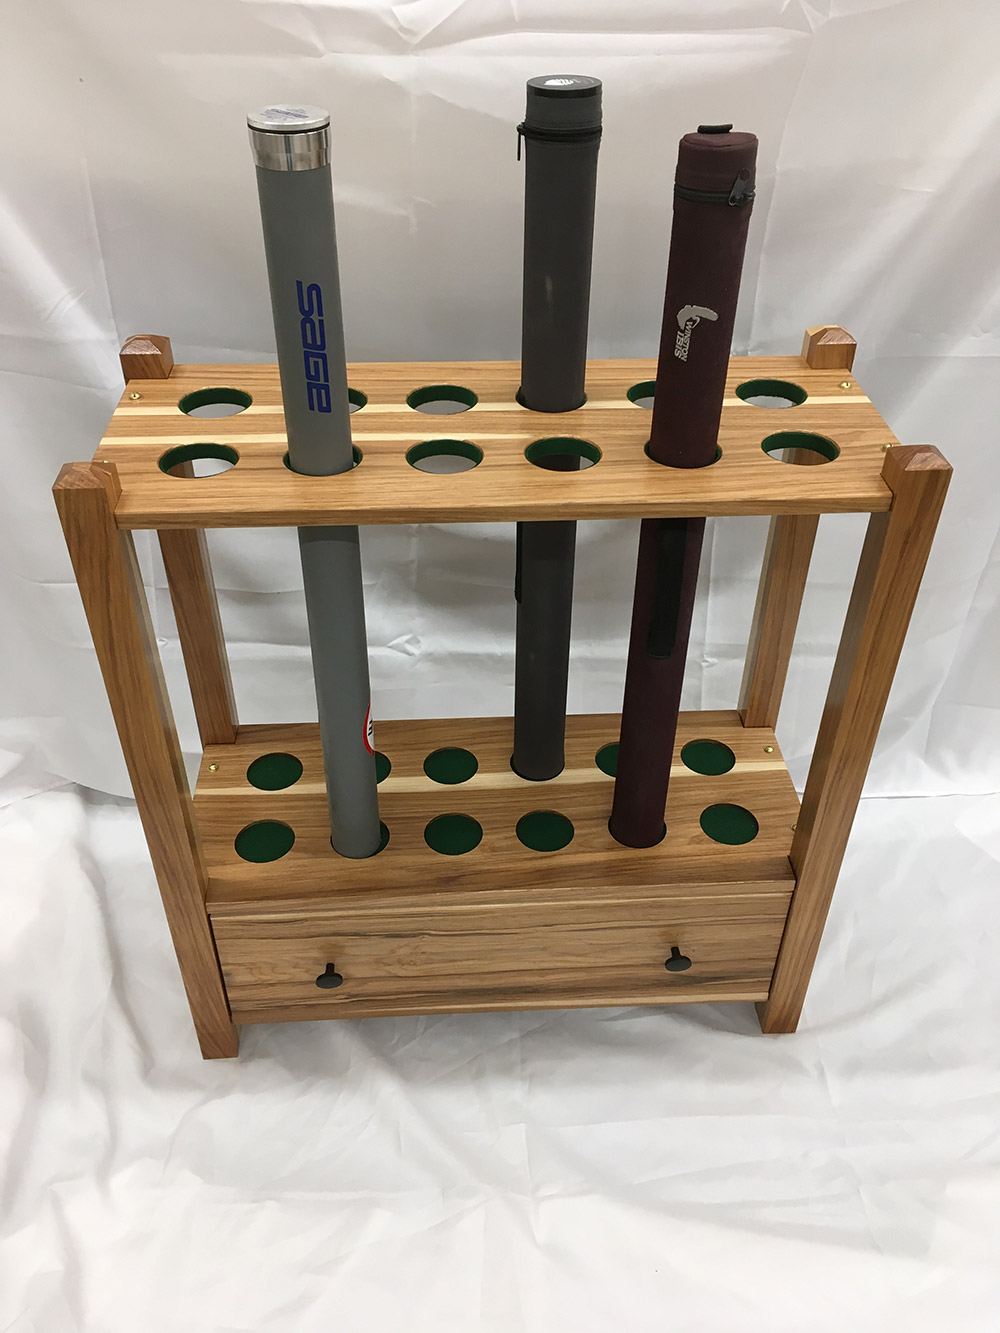 Custom Fly Fishing Cabinets From New Hamphire: Solid Cherry, 50% OFF